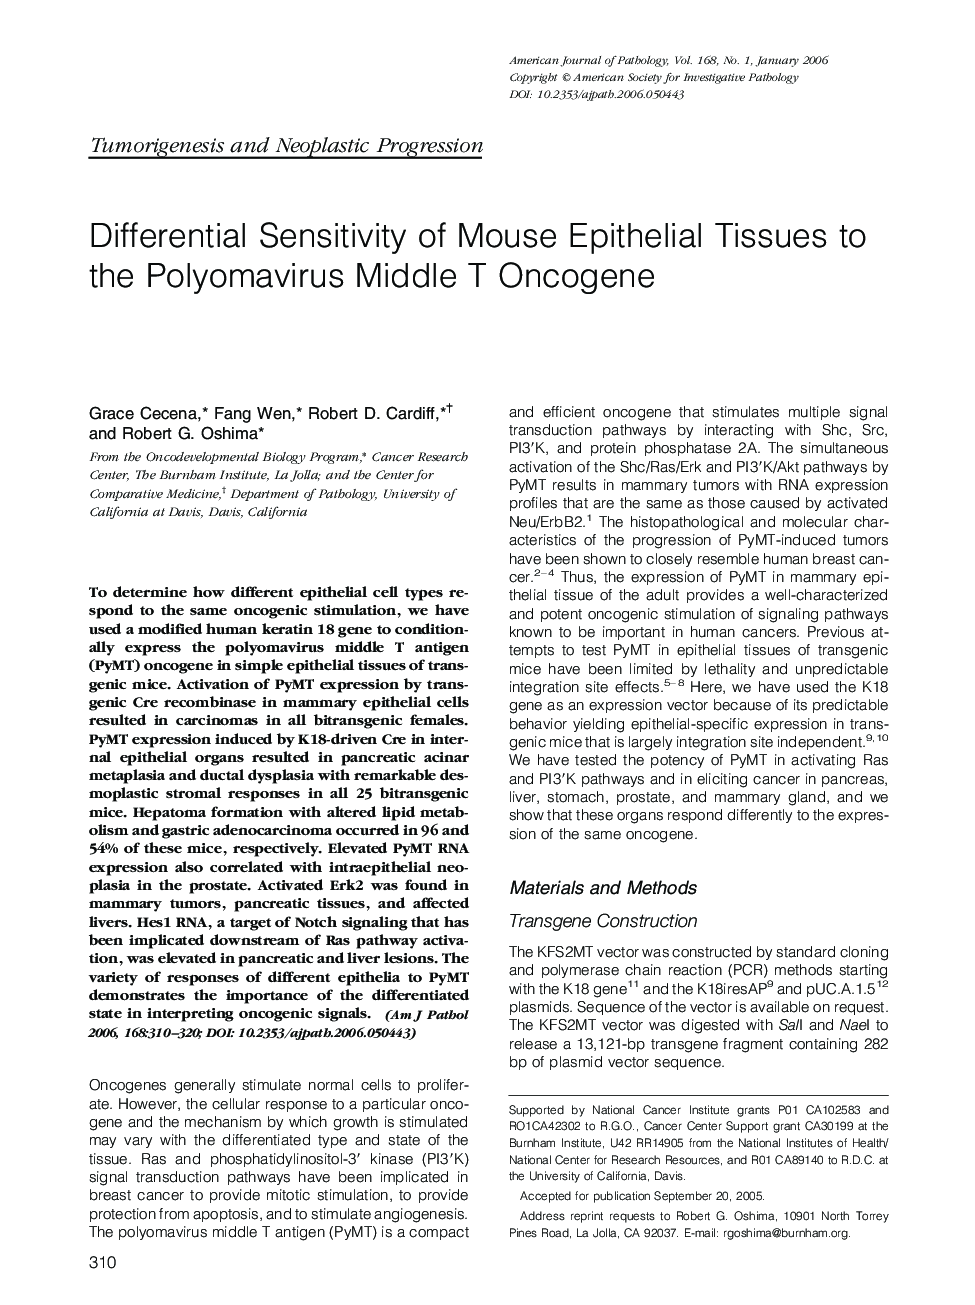 Regular ArticlesDifferential Sensitivity of Mouse Epithelial Tissues to the Polyomavirus Middle T Oncogene